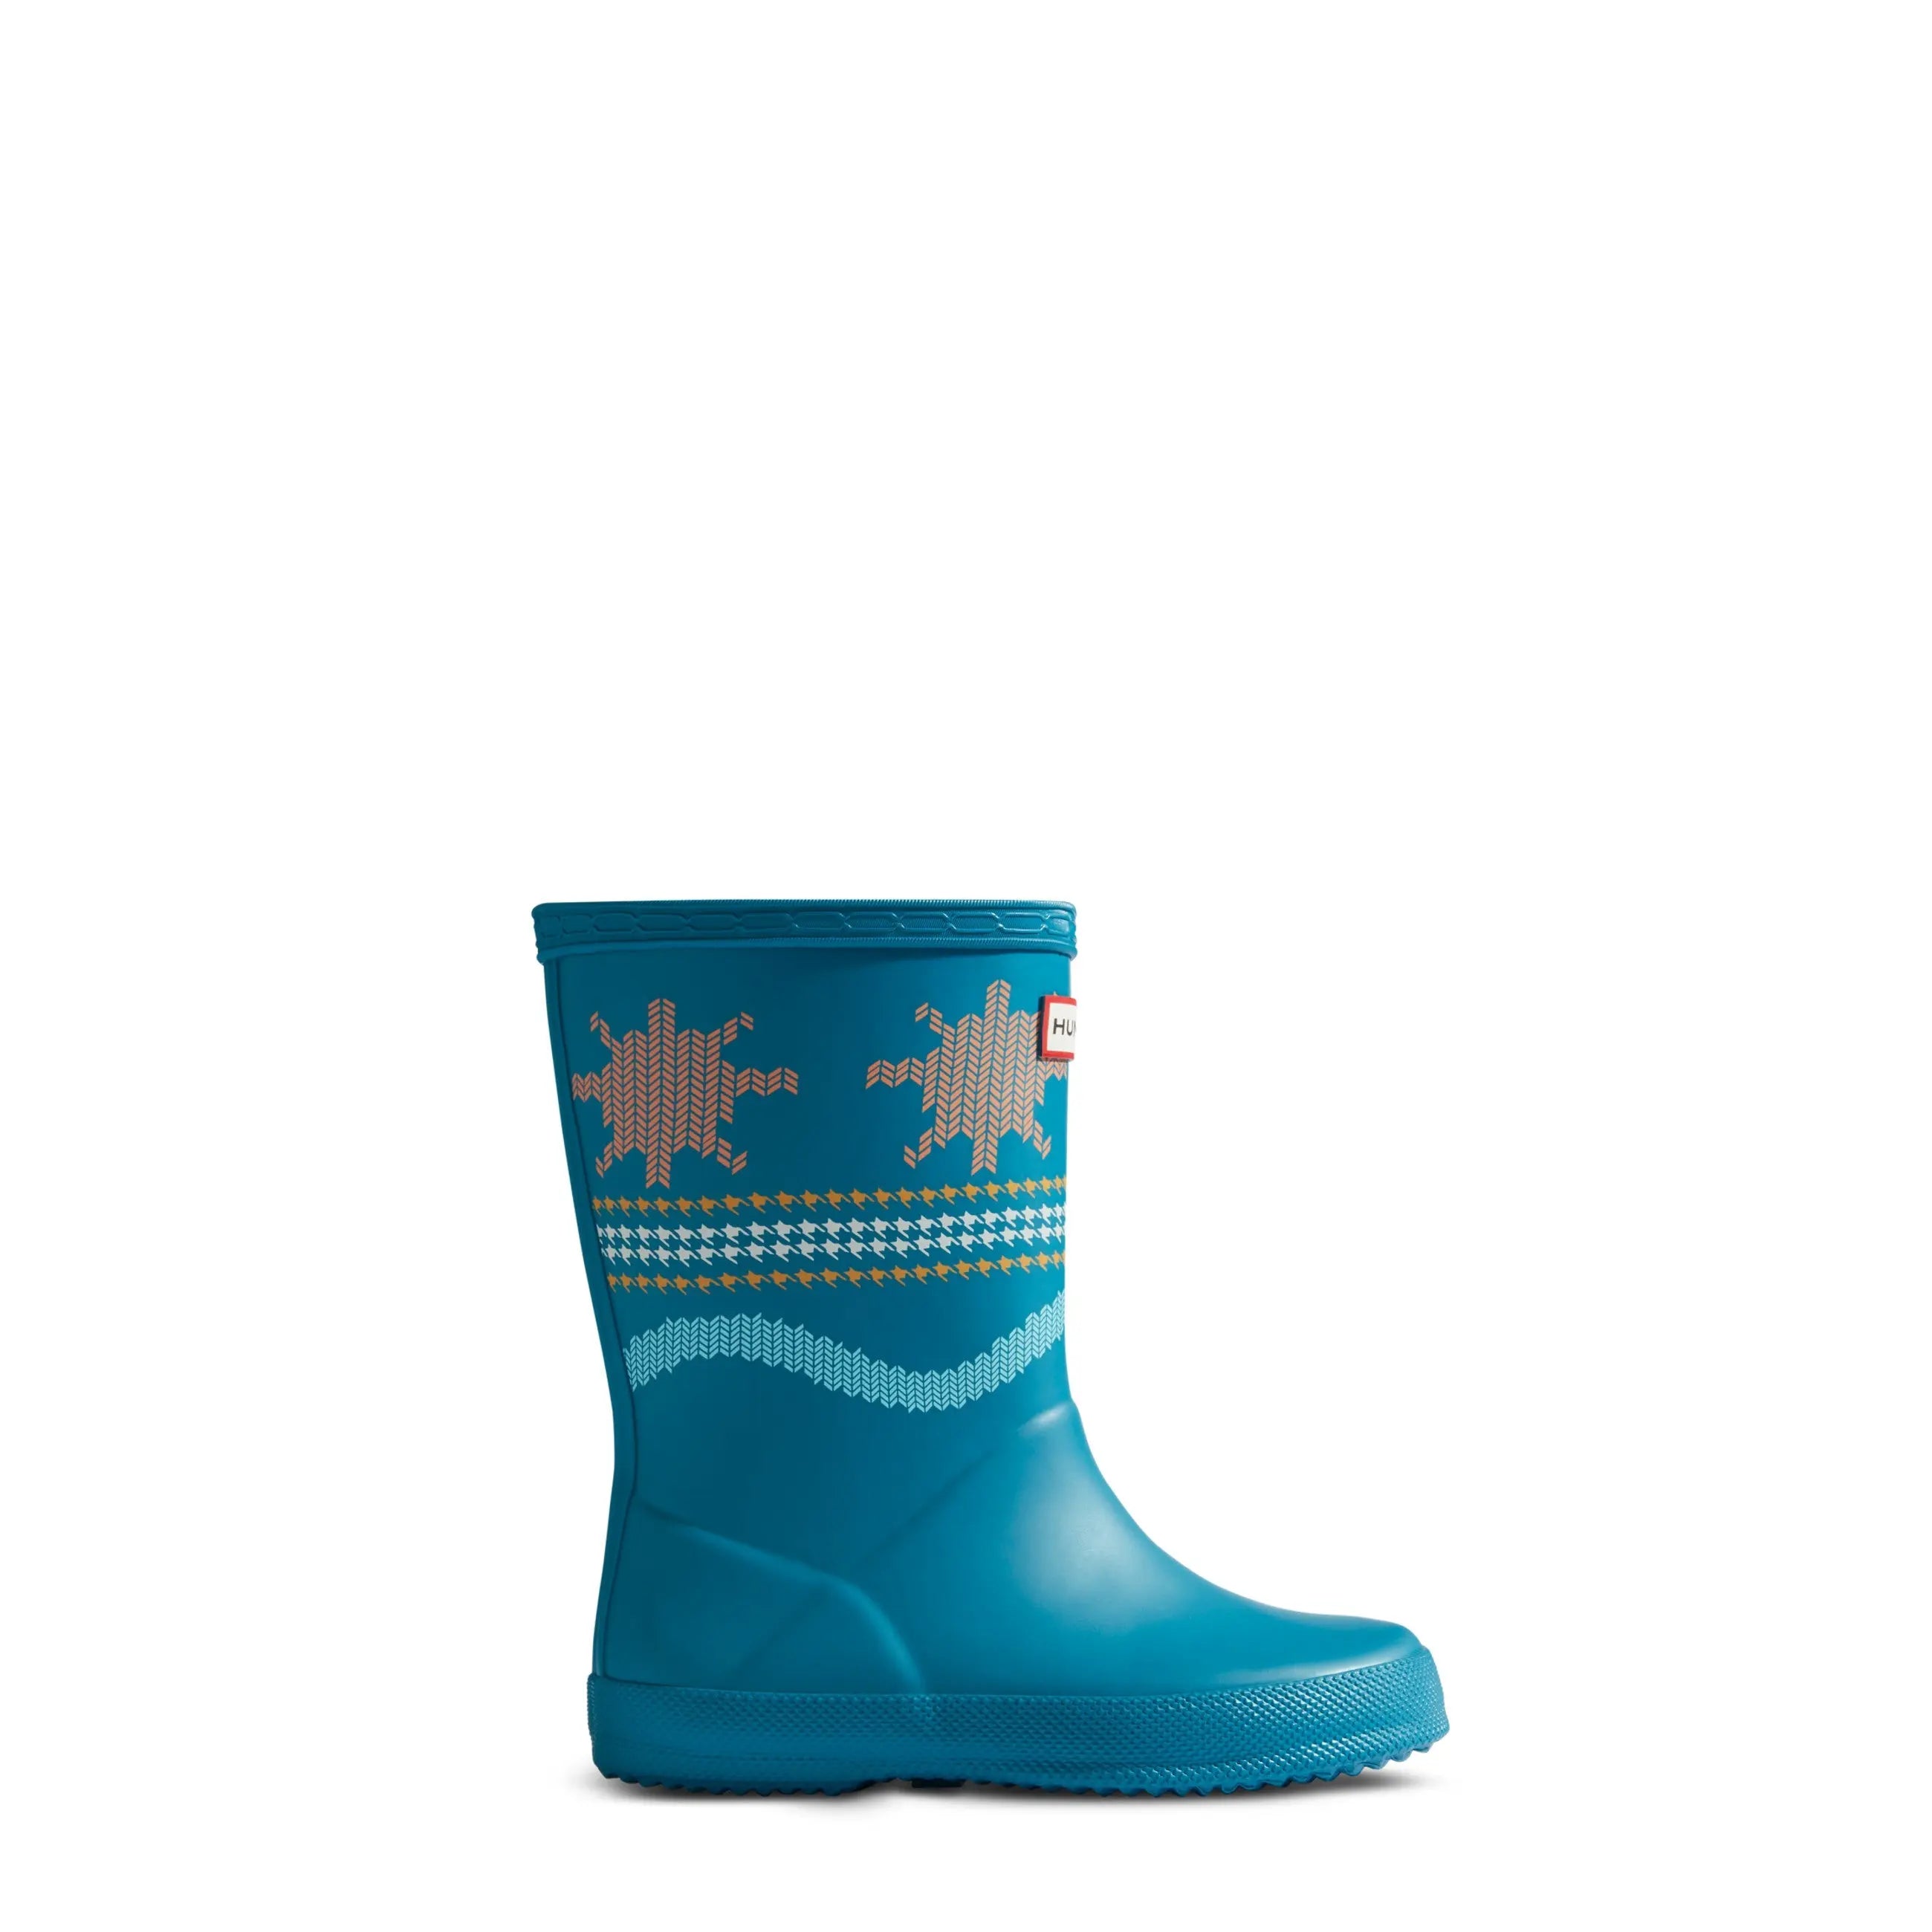 Kids First Weather Boots - Hunter Boots Kids First Weather Boots Frolicking Blue Hunter Boots Kids First > Rain Boots > Kids First Rain Boots